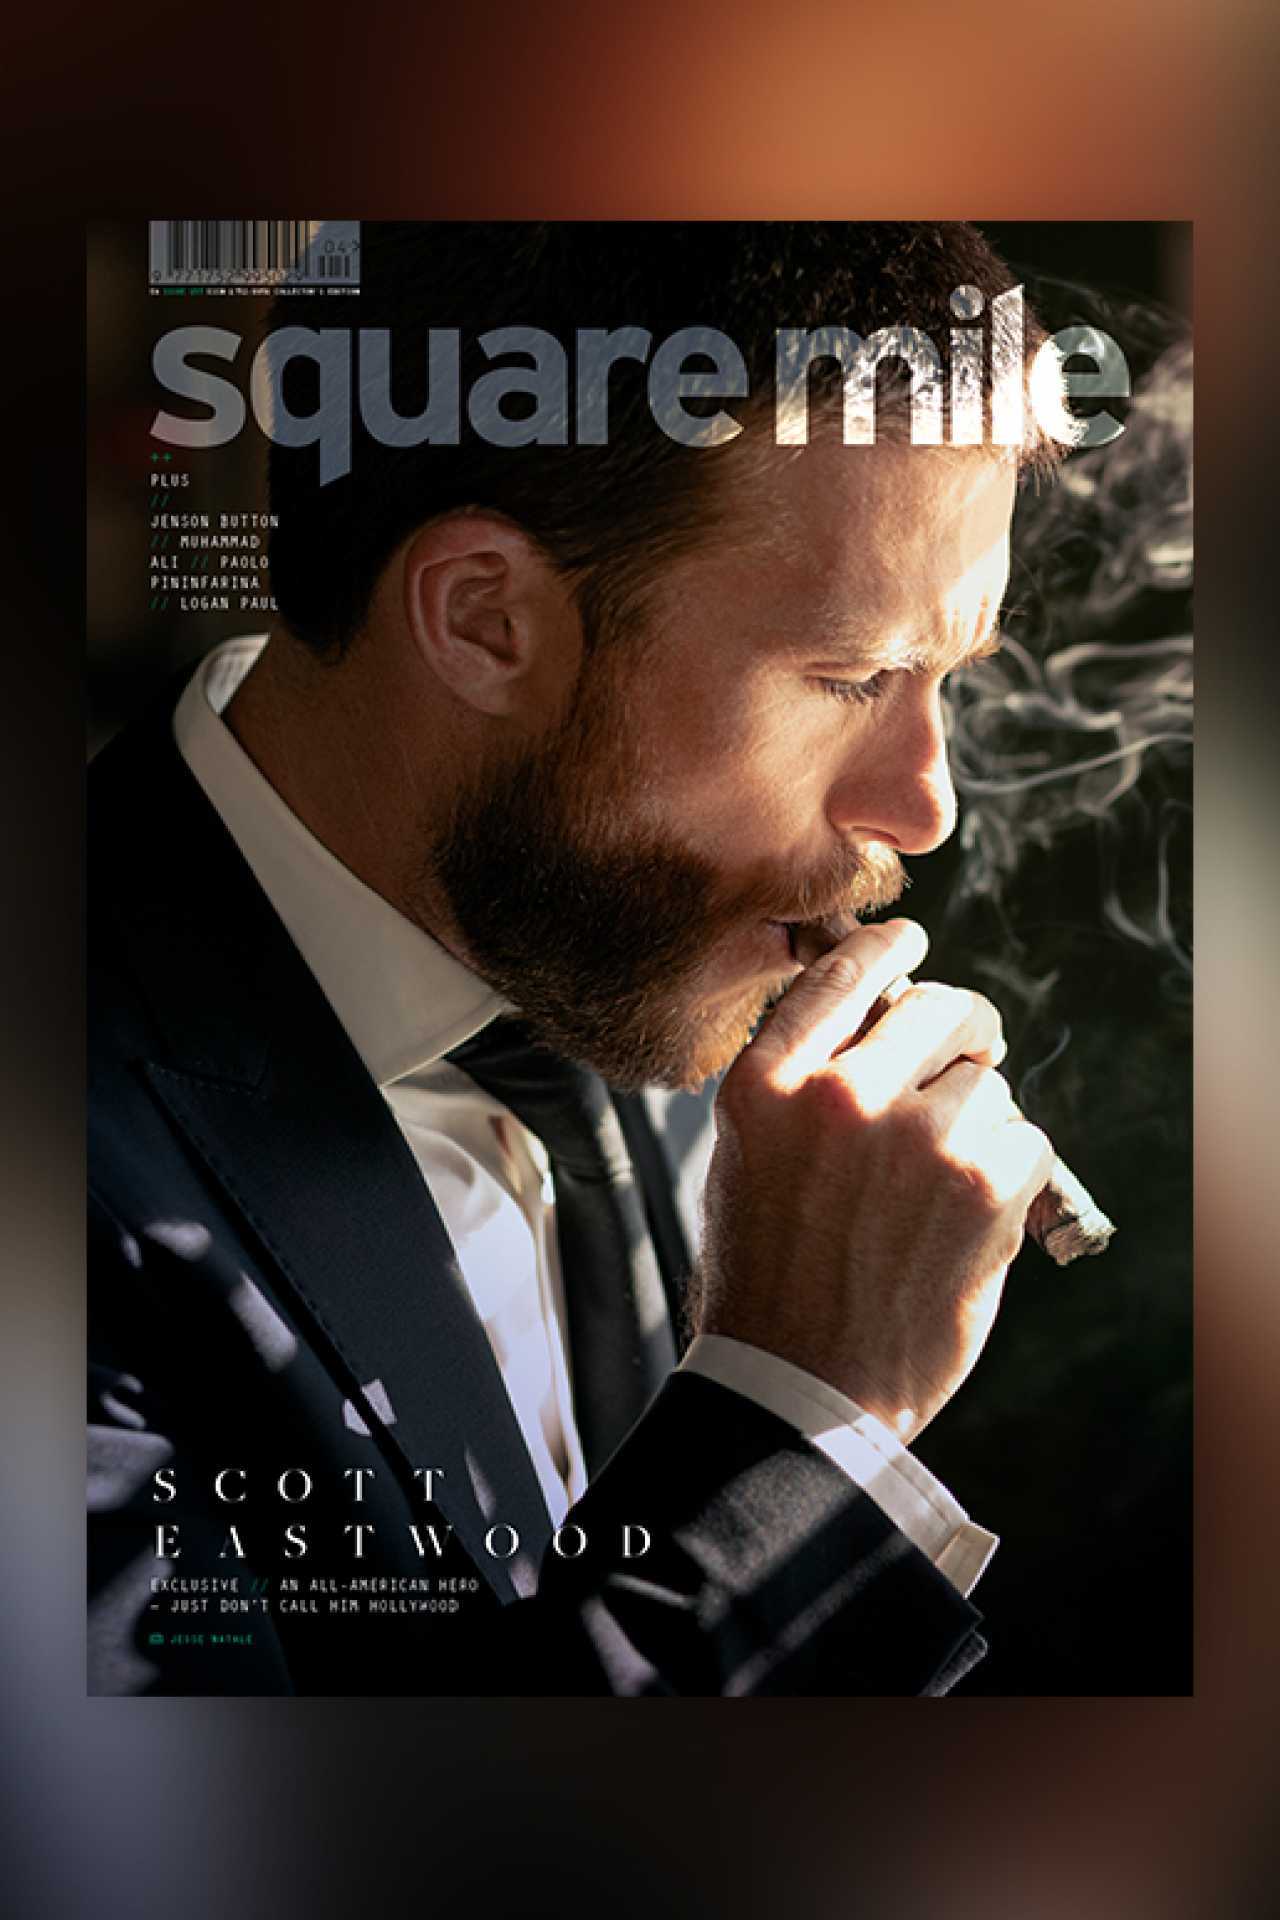 Scott Eastwood cover star - Square Mile magazine issue 153 - shot by Jesse Natale - Subscribers' Edition